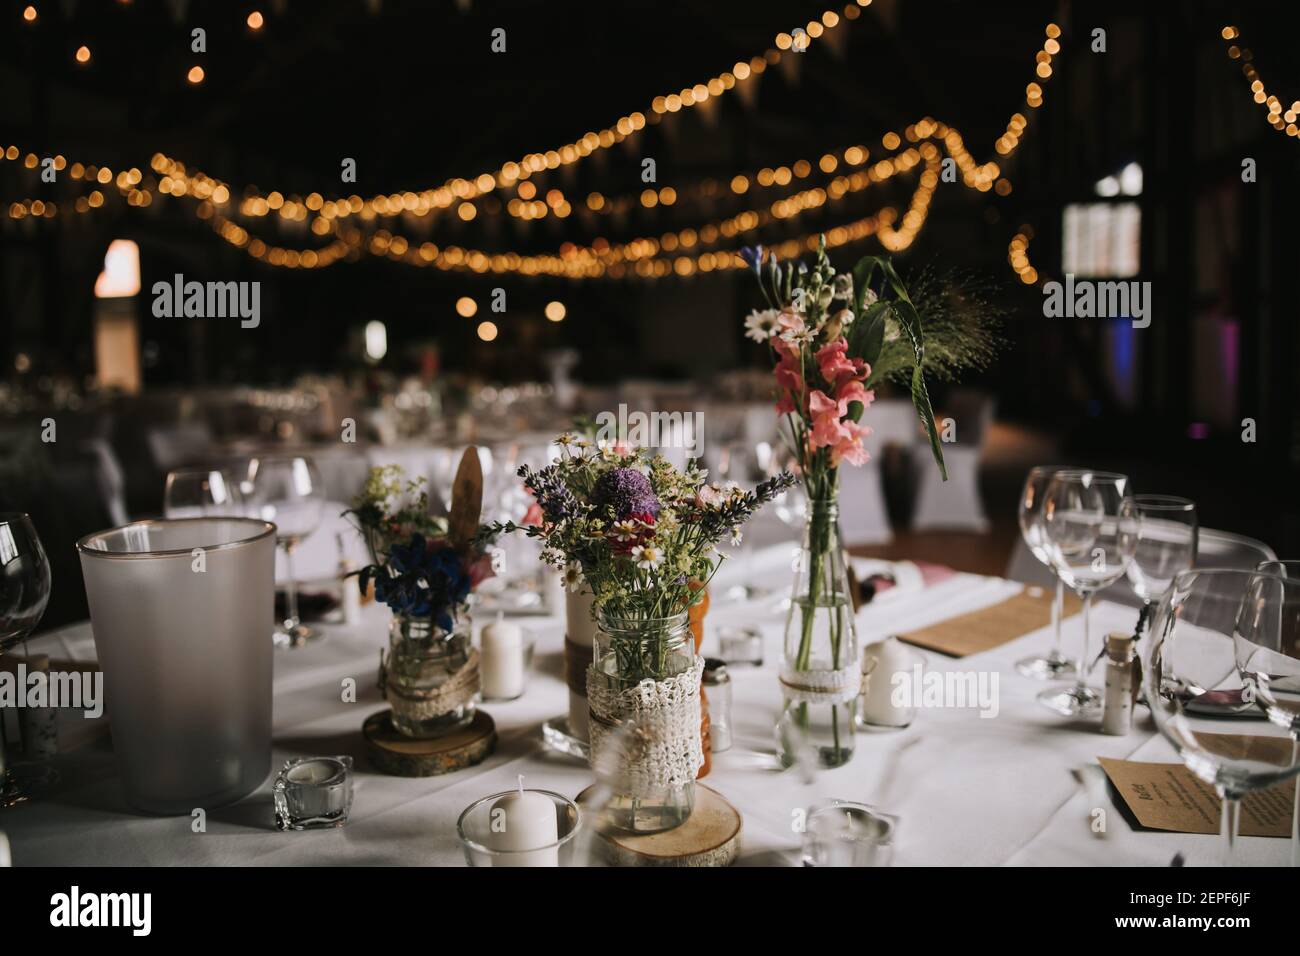 a wedding table at a restaurant in the evening Stock Photo